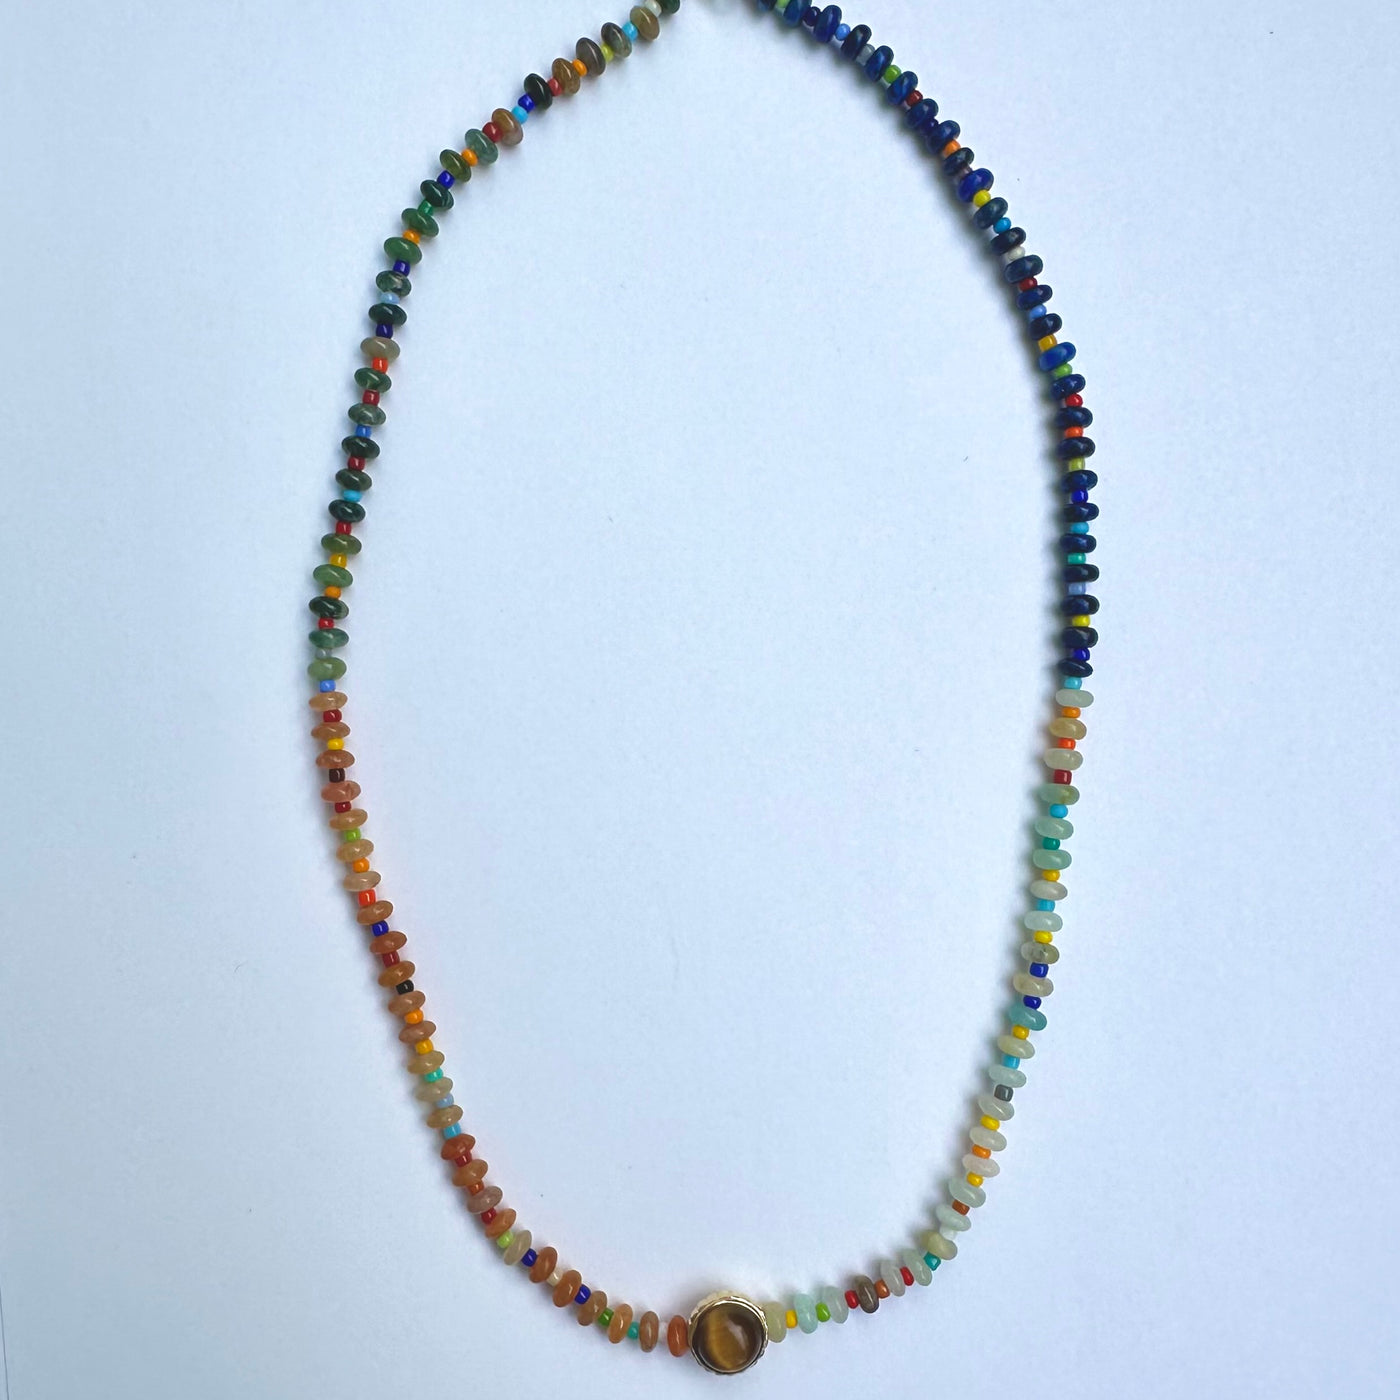 luis morais multicolored beaded 16" necklace 14k gold skull toggle clasp with collared cabochon tigers eye and balance symbole